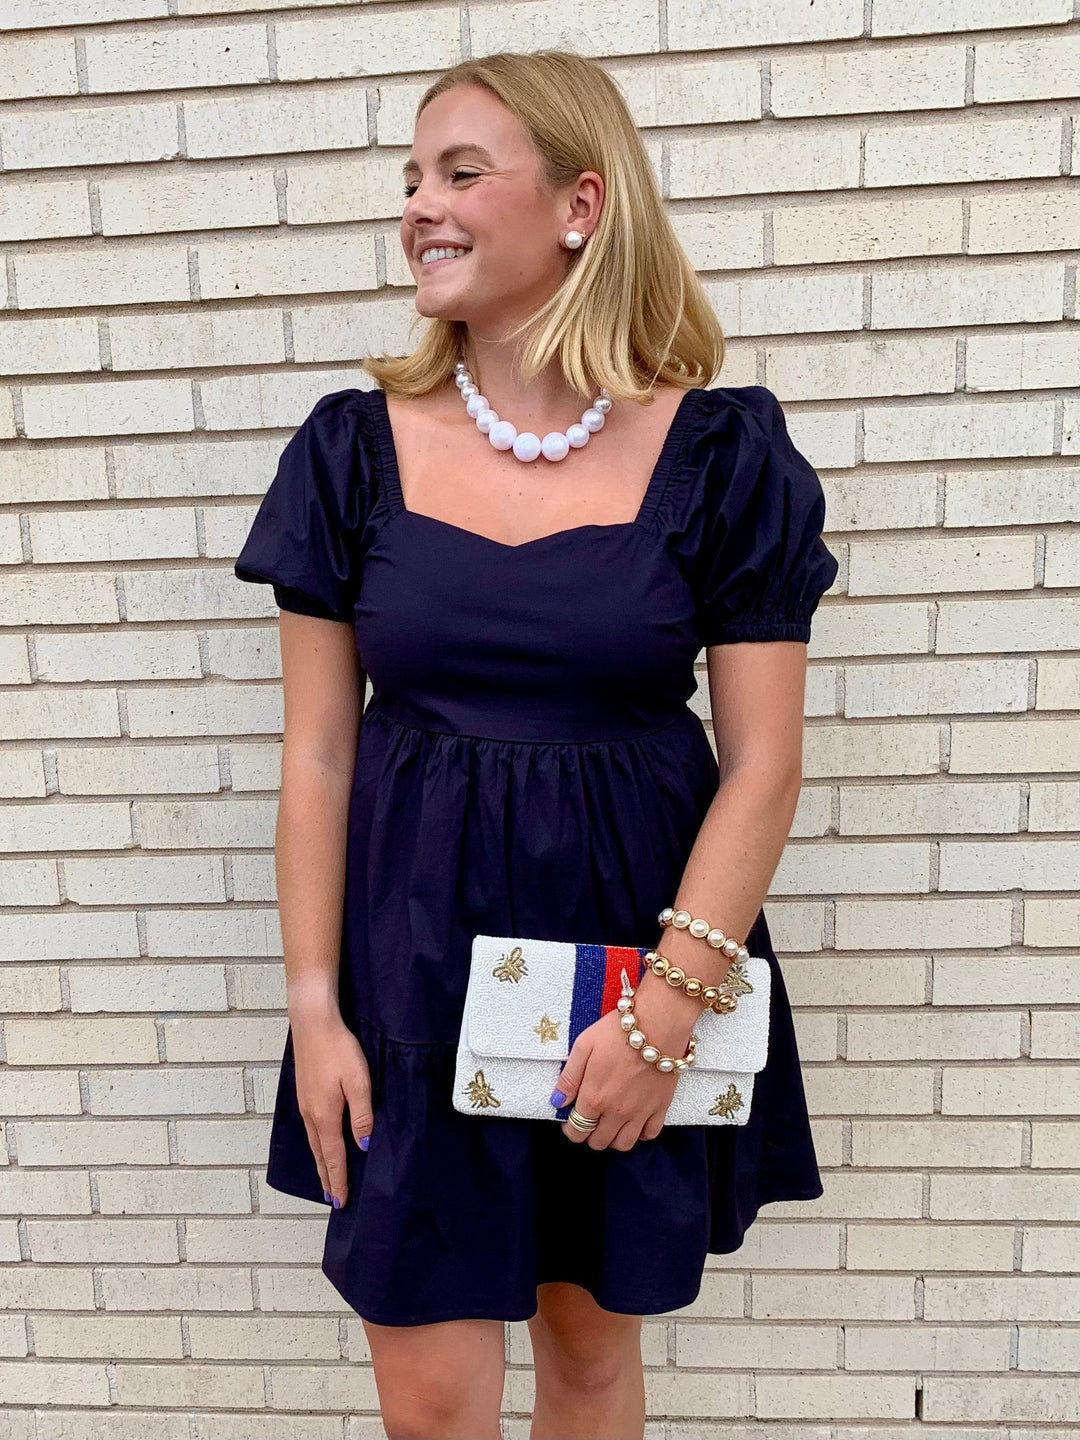 Navy dress in Houston Texas at Tres Chic